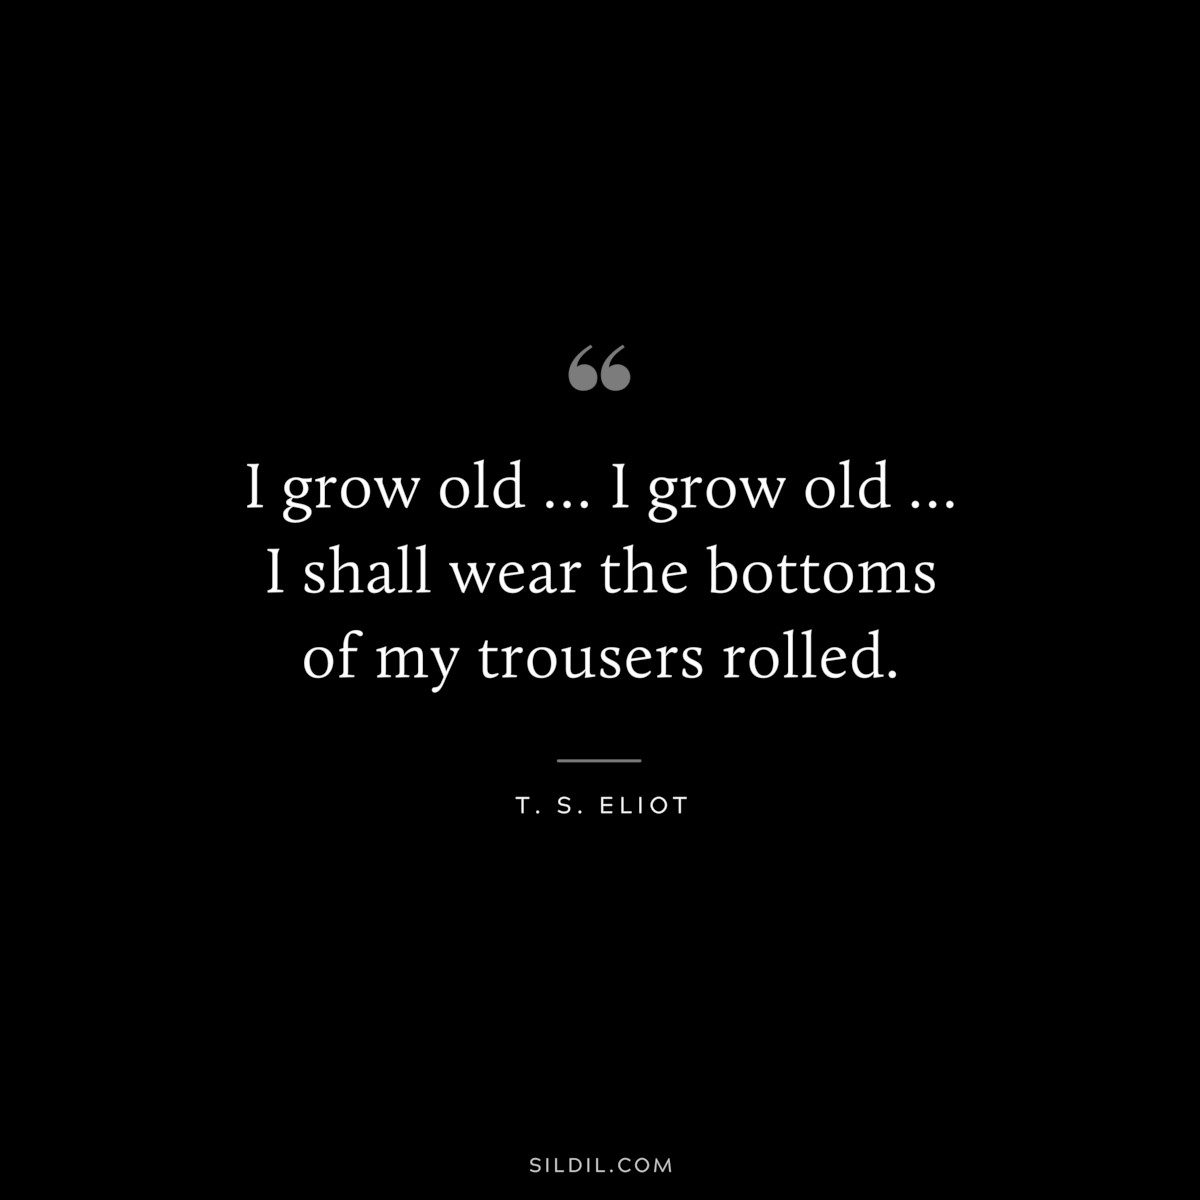 I grow old … I grow old … I shall wear the bottoms of my trousers rolled. ― T. S. Eliot